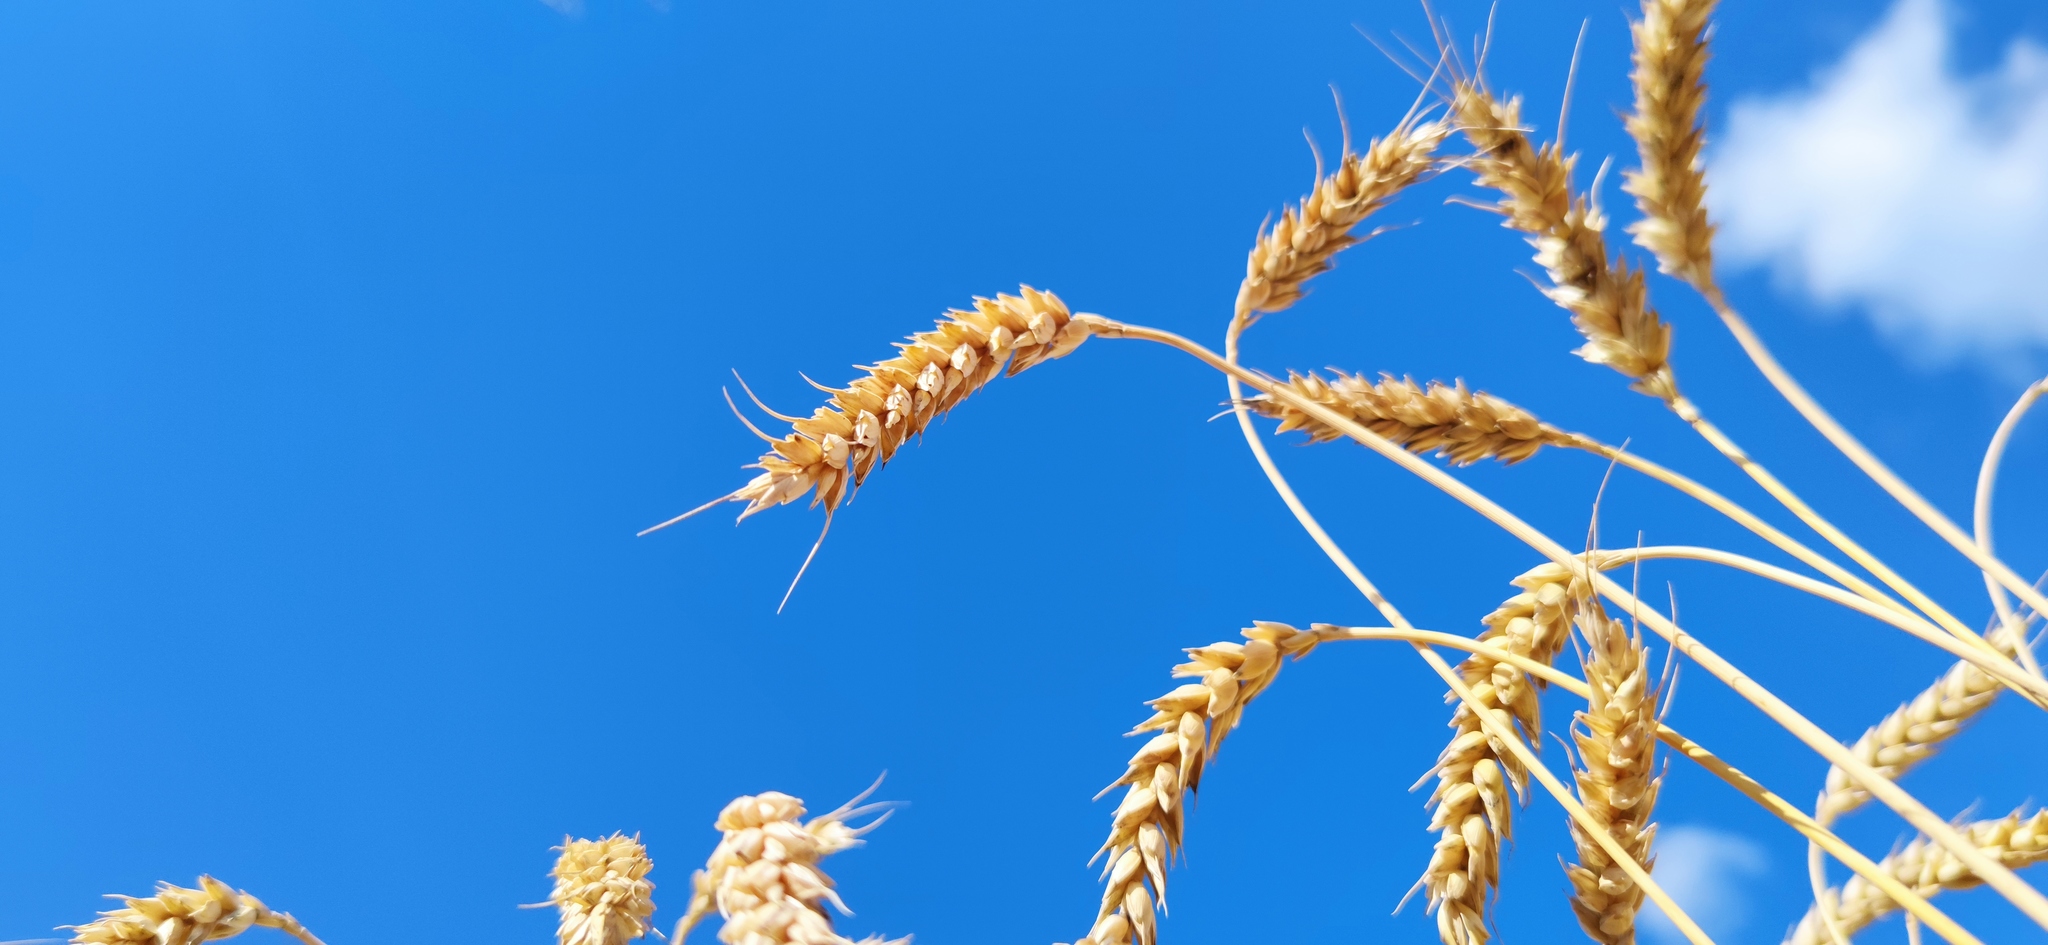 Wheat - My, Wheat, Field, Native open spaces, Longpost, Mobile photography, Spikelet, Close-up, The photo